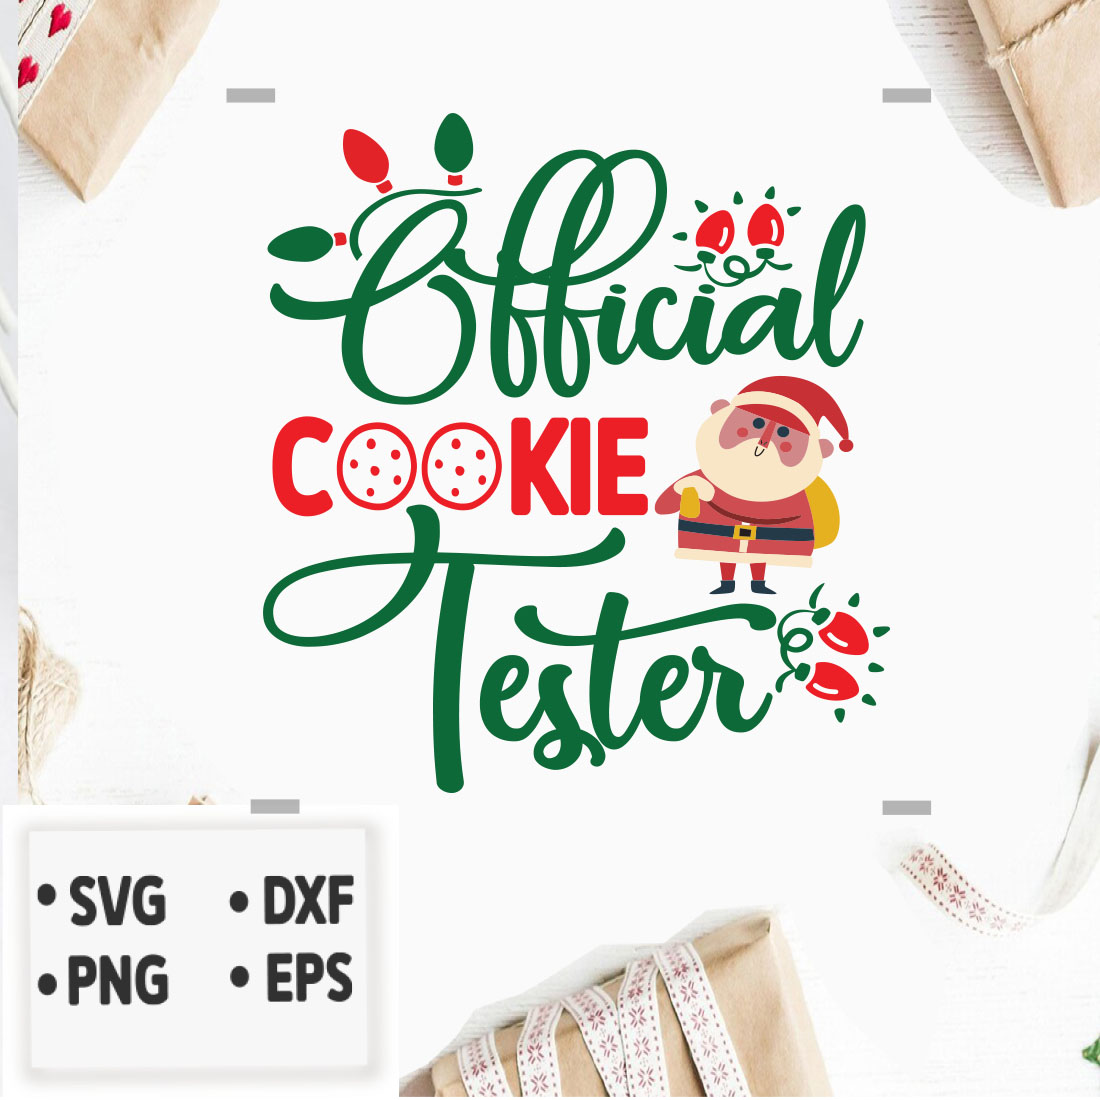 Image with enchanting print Official cookie tester.